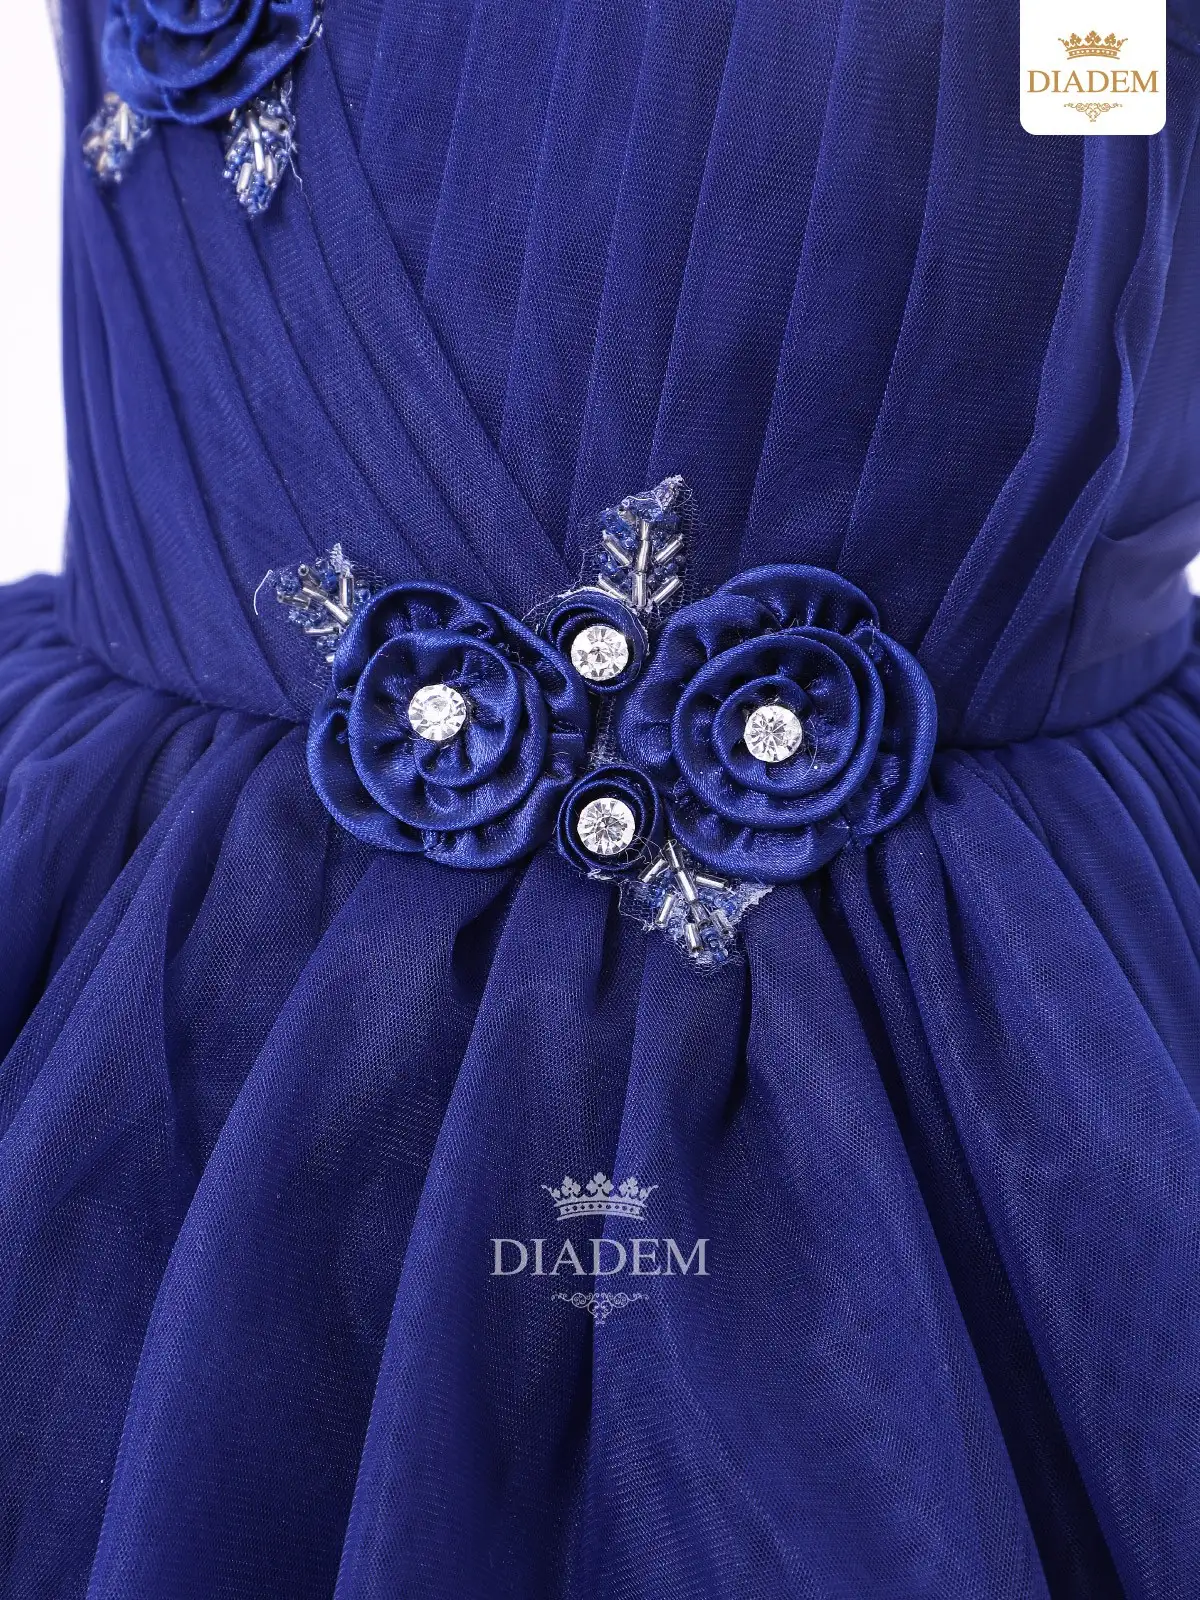 Dark Blue Gown Embellished In Crystal Beads And Frilled Bottom